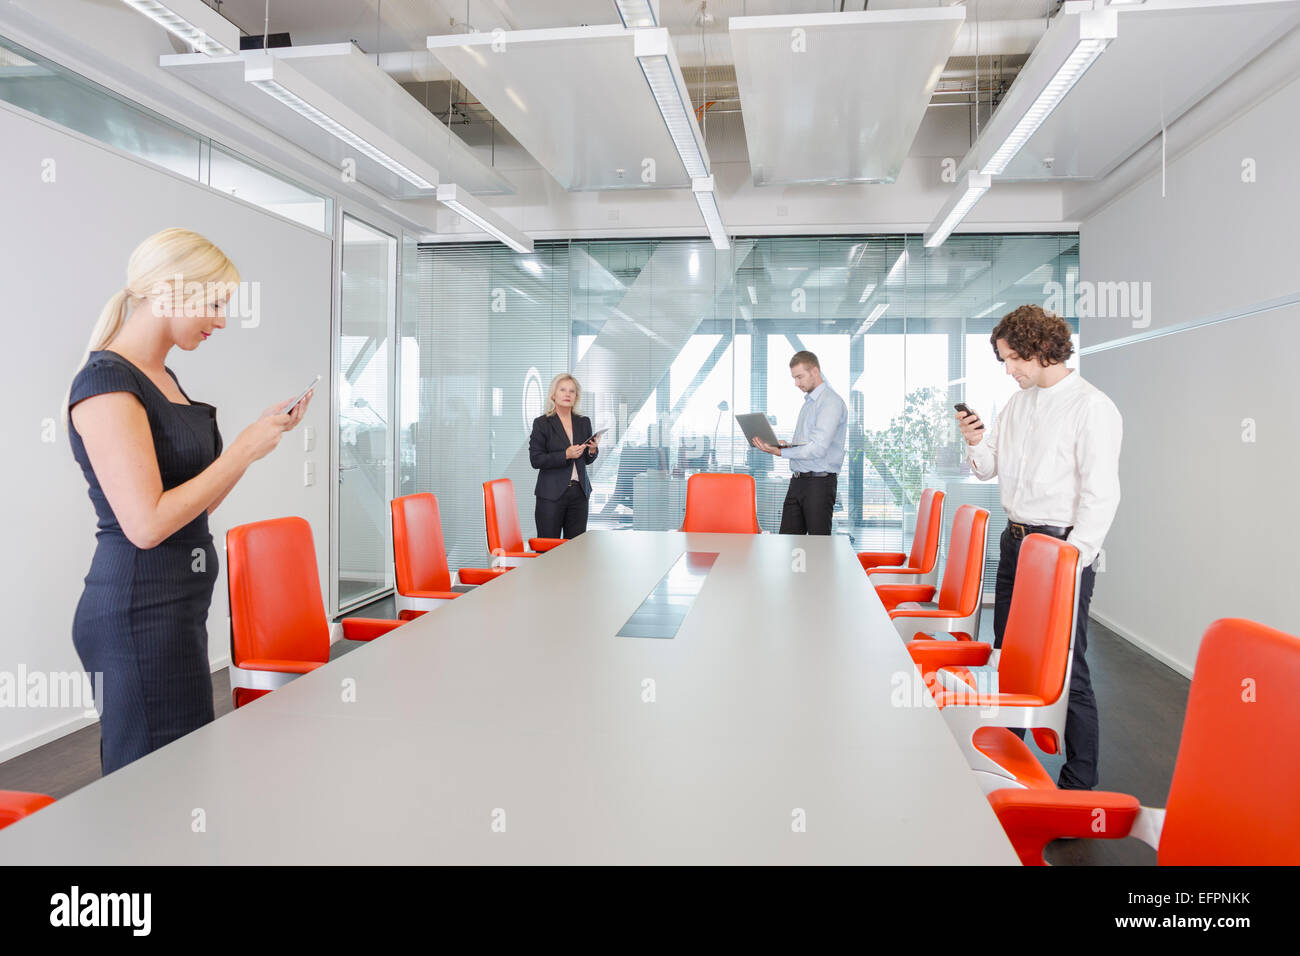 People using digital devices in conference room Stock Photo